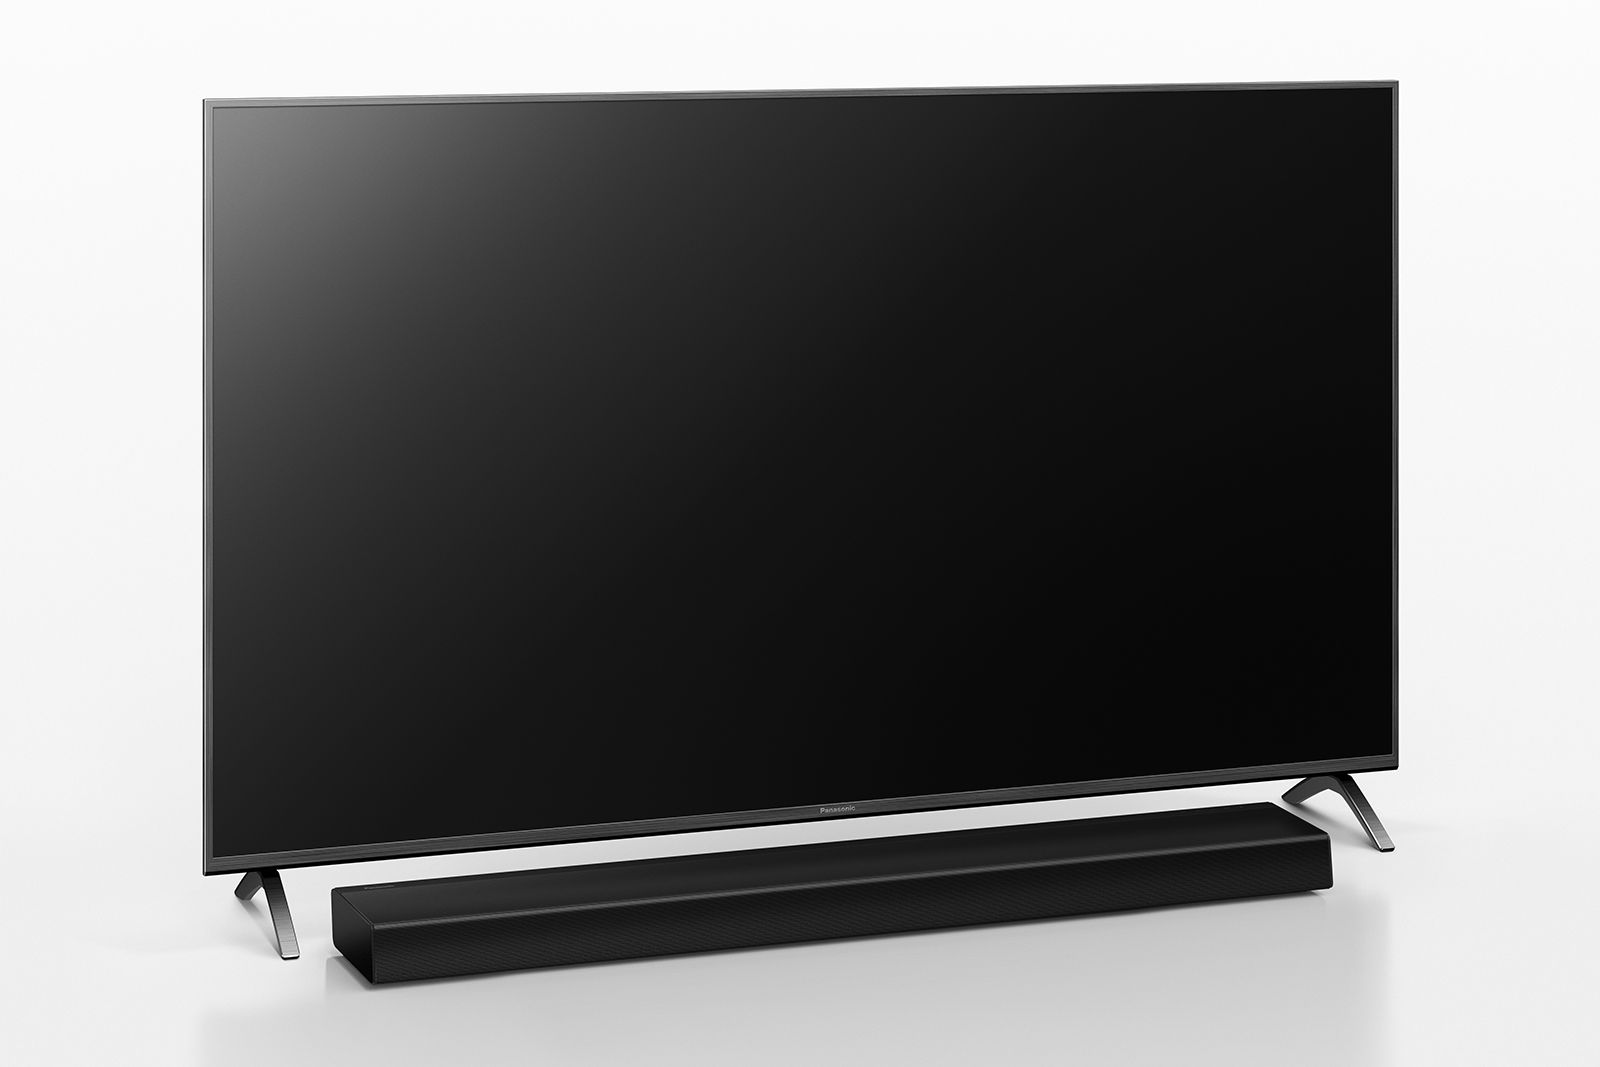 Panasonic Htb600 Soundbar With Wireless Subwoofer Announced Joined By Htb400 In Range image 1